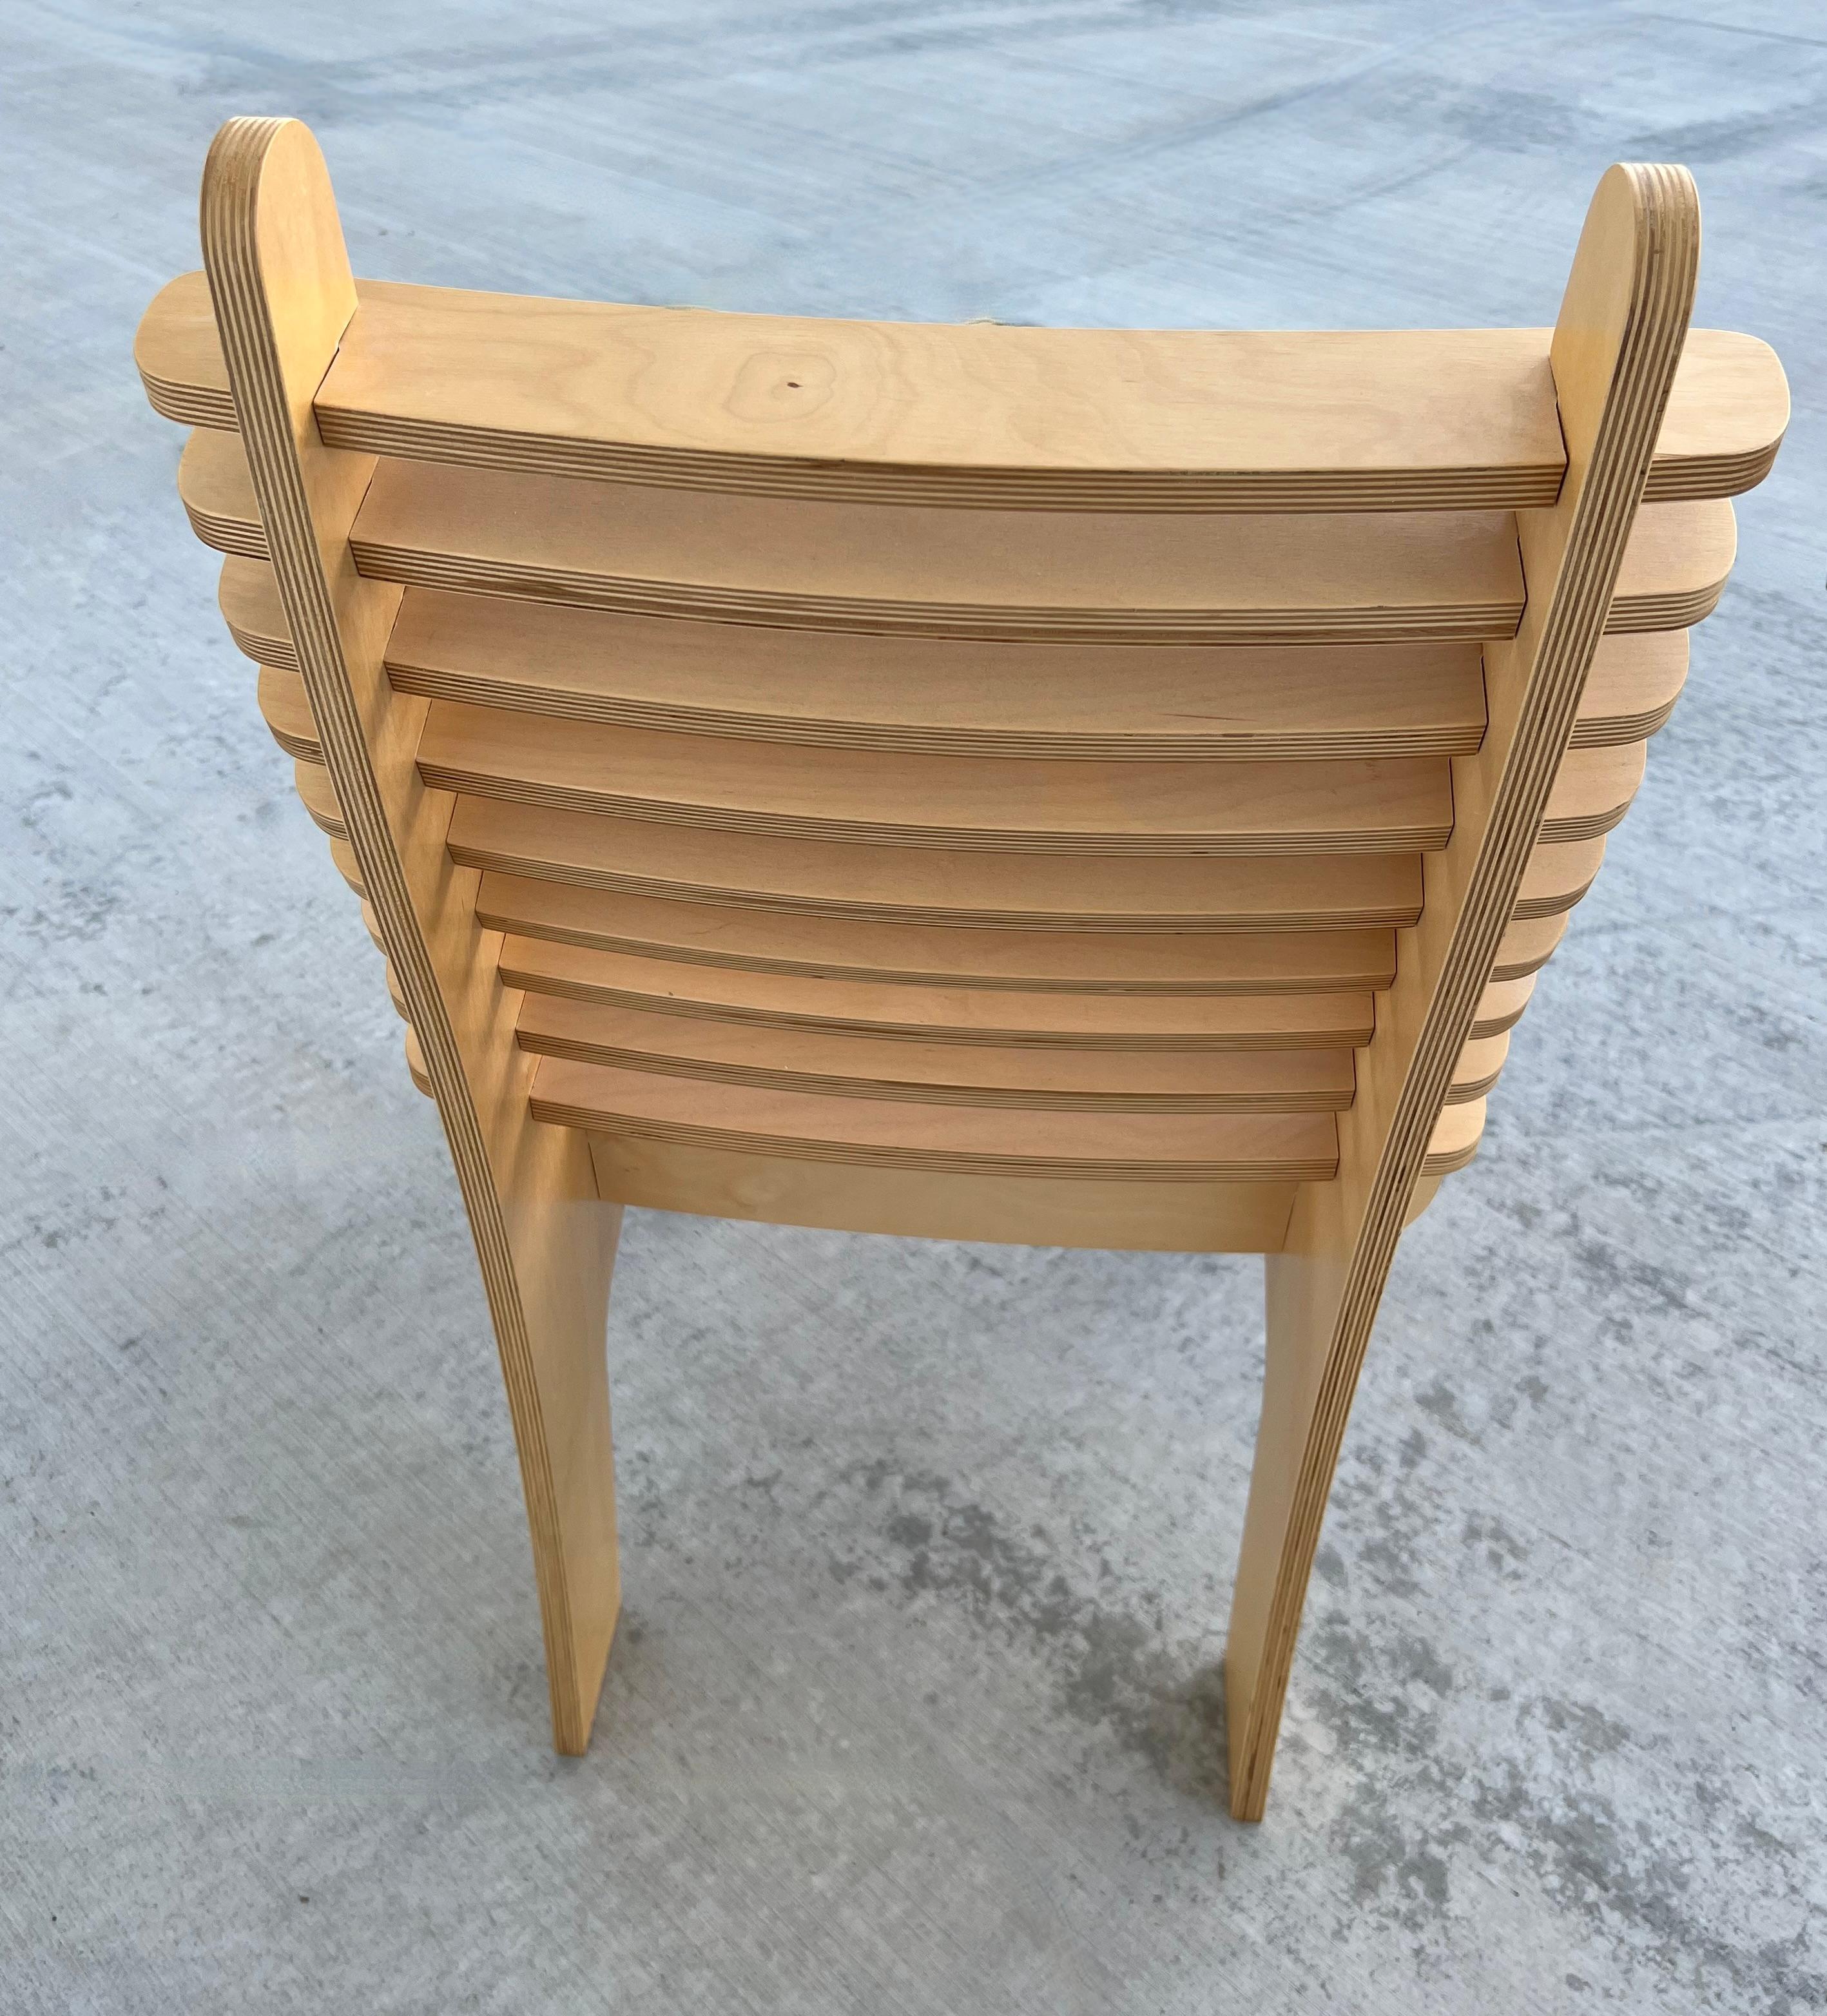 Modern Blond Plywood Minimalist Slat Side Chair Art Architectural Piece For Sale 1